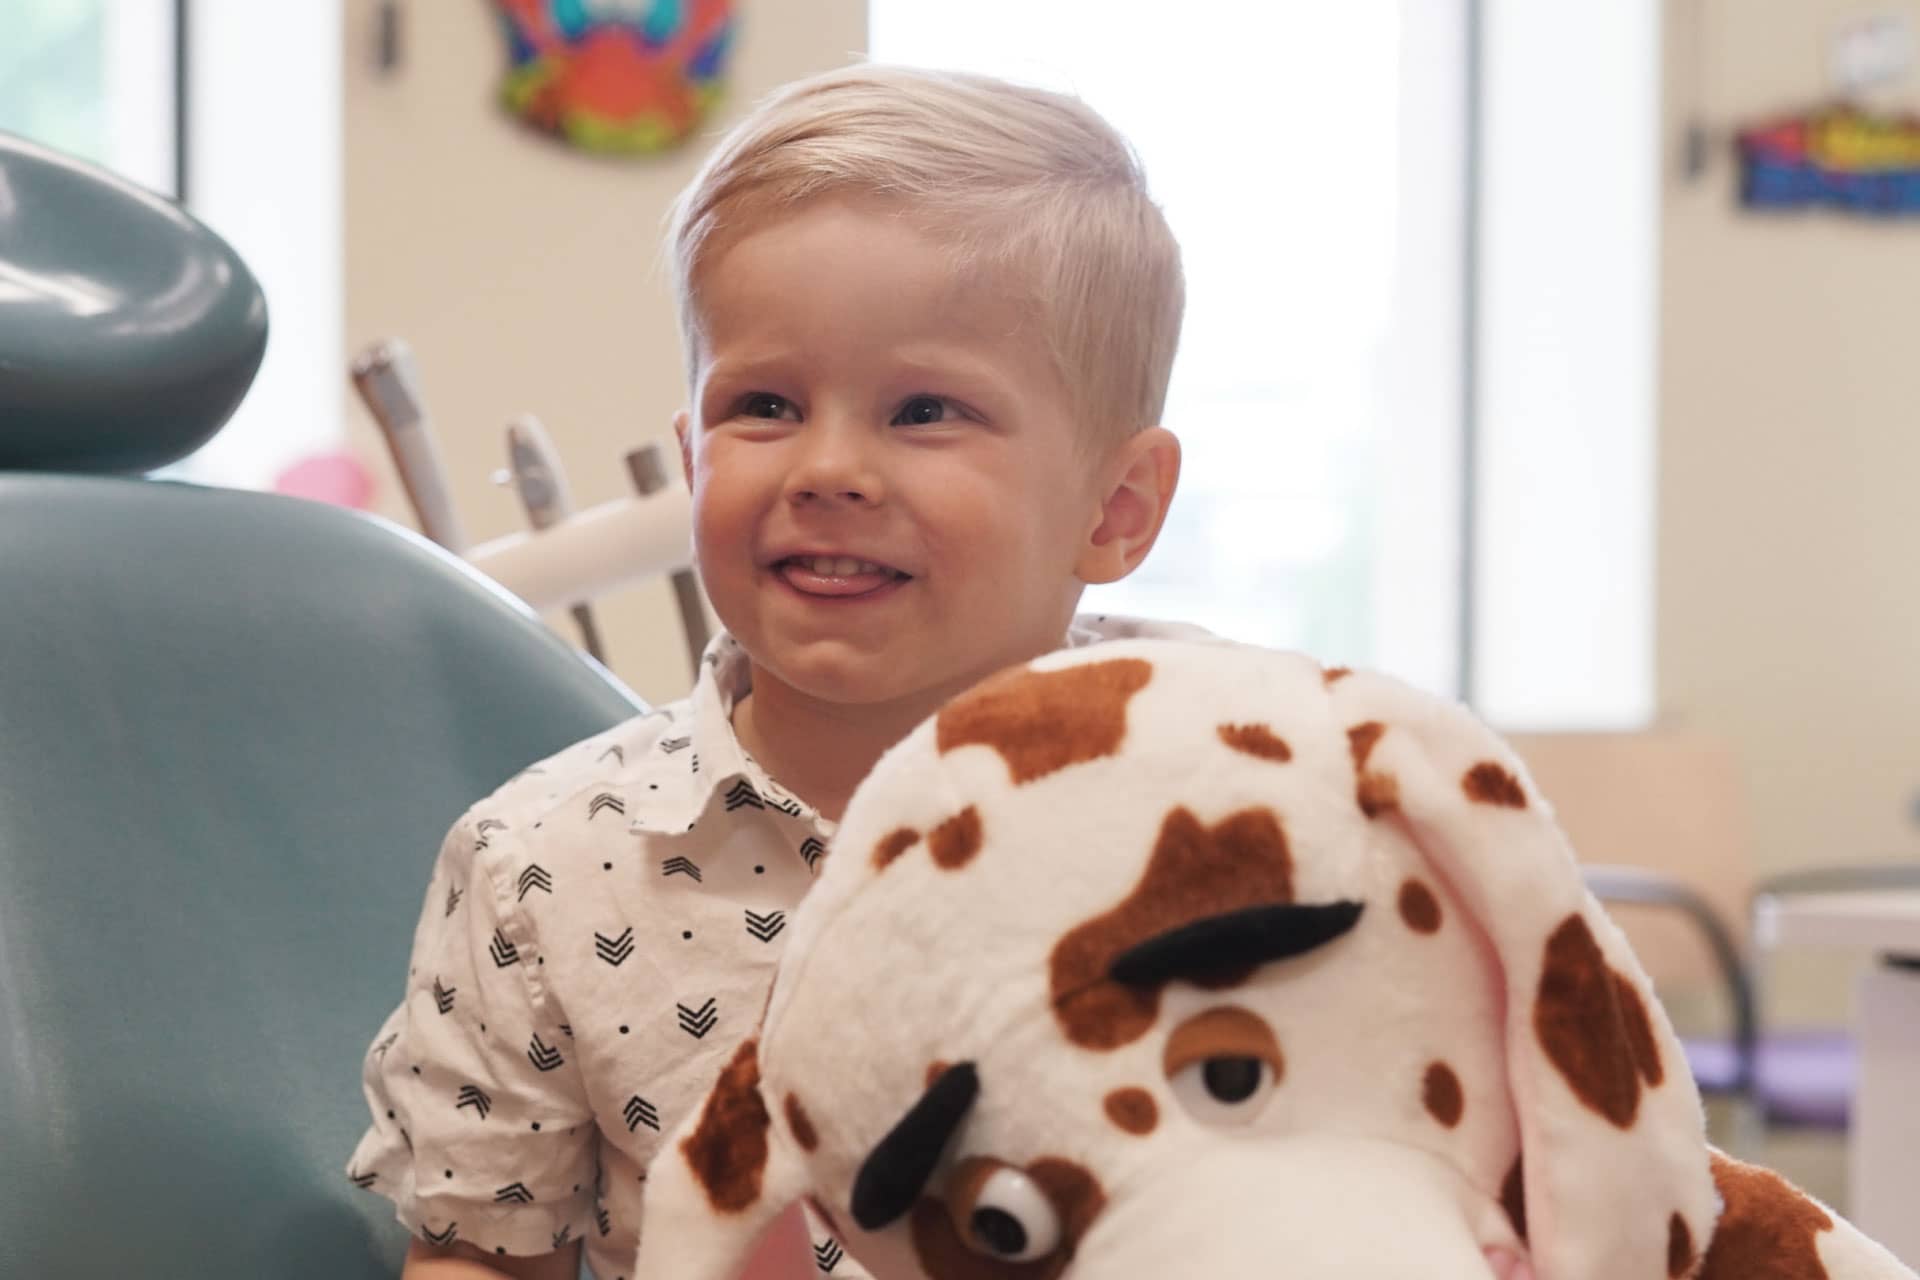 pediatric patient with stuffed animal in exam room